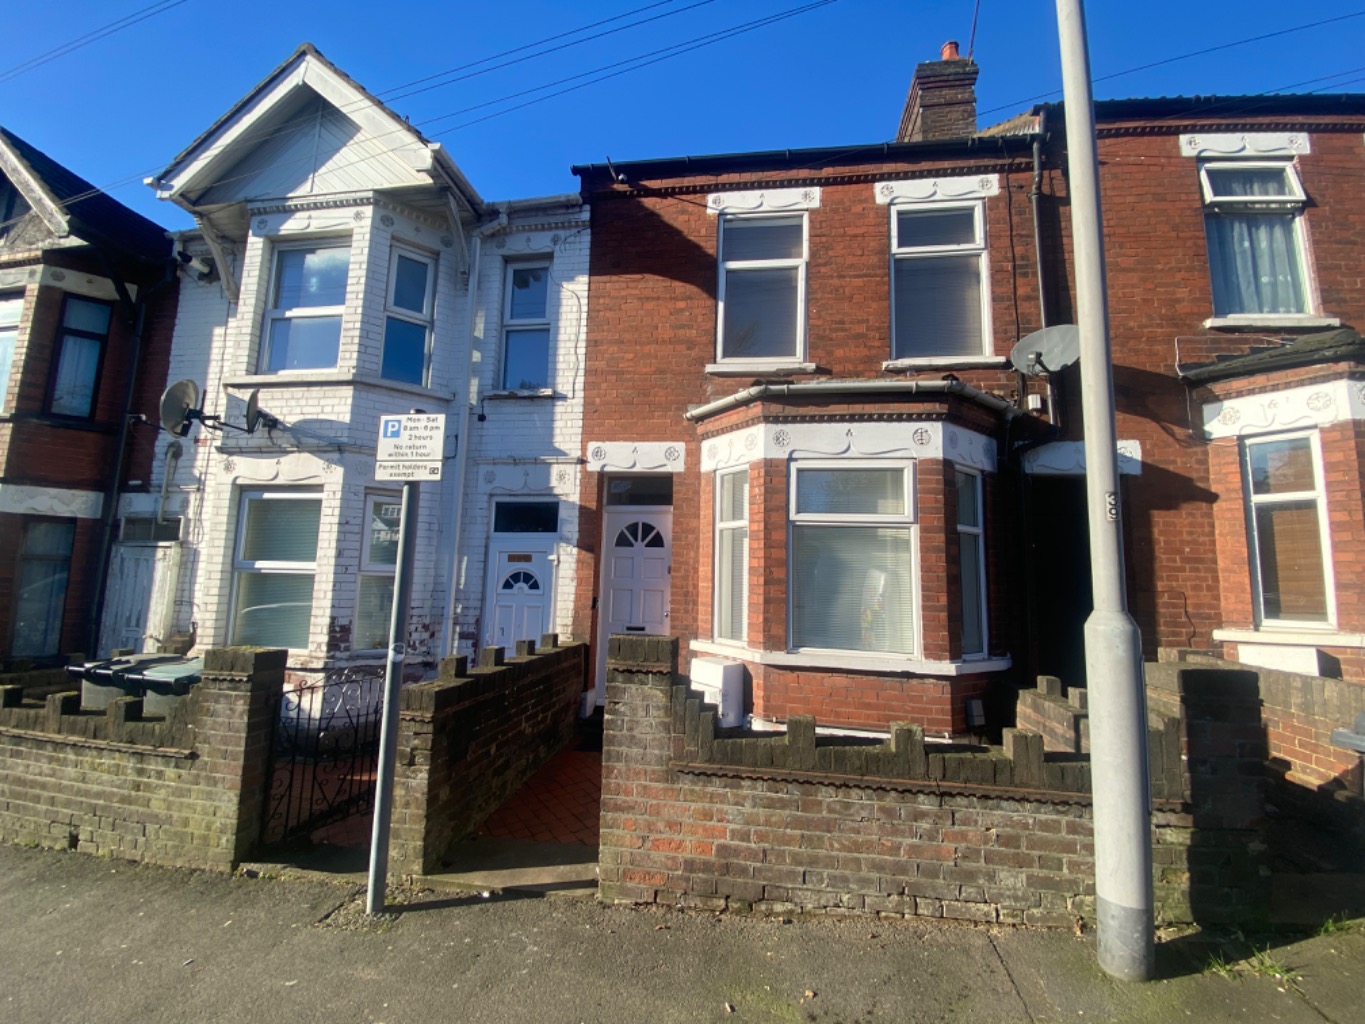 4 bed terraced house for sale in Hitchin Road, Luton, LU2 